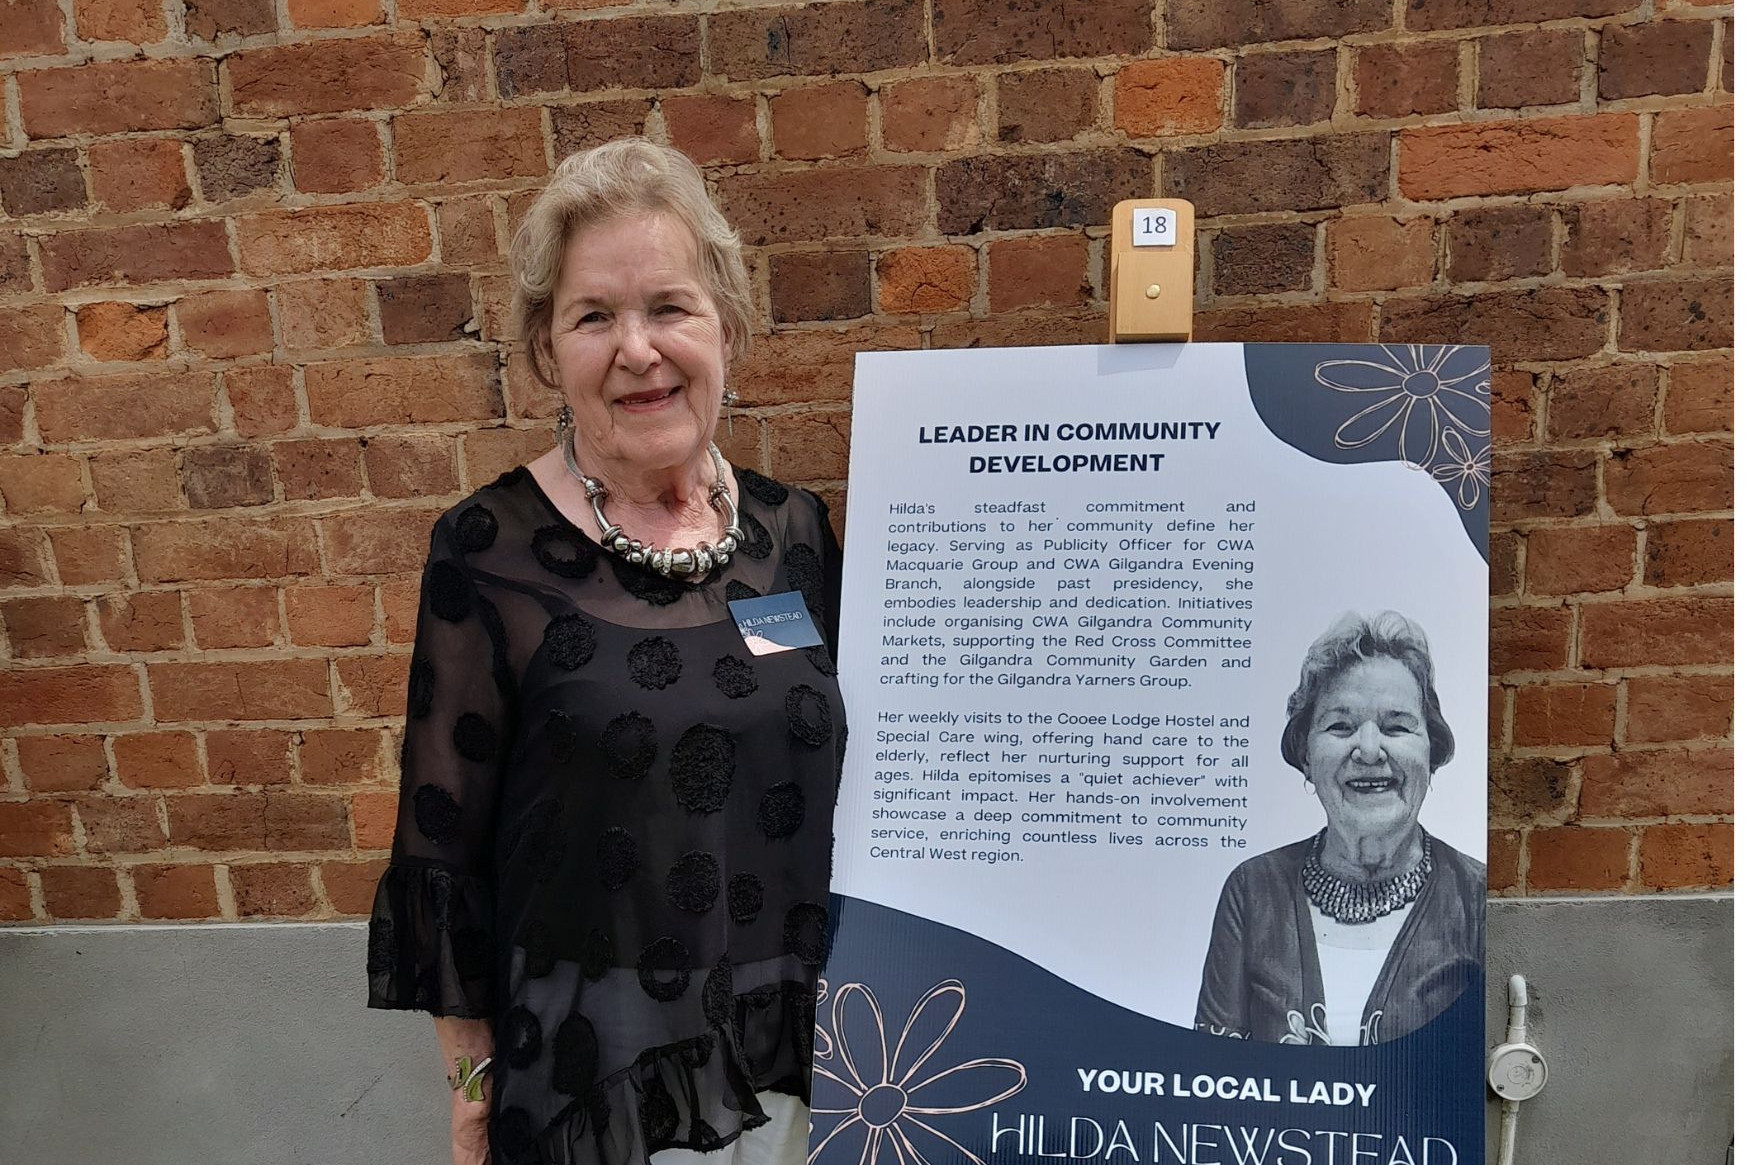 Gilgandra’s Hilda Newstead was recognised as a community development leader at an International Women’s Day event held in Dubbo. Photo contributed.